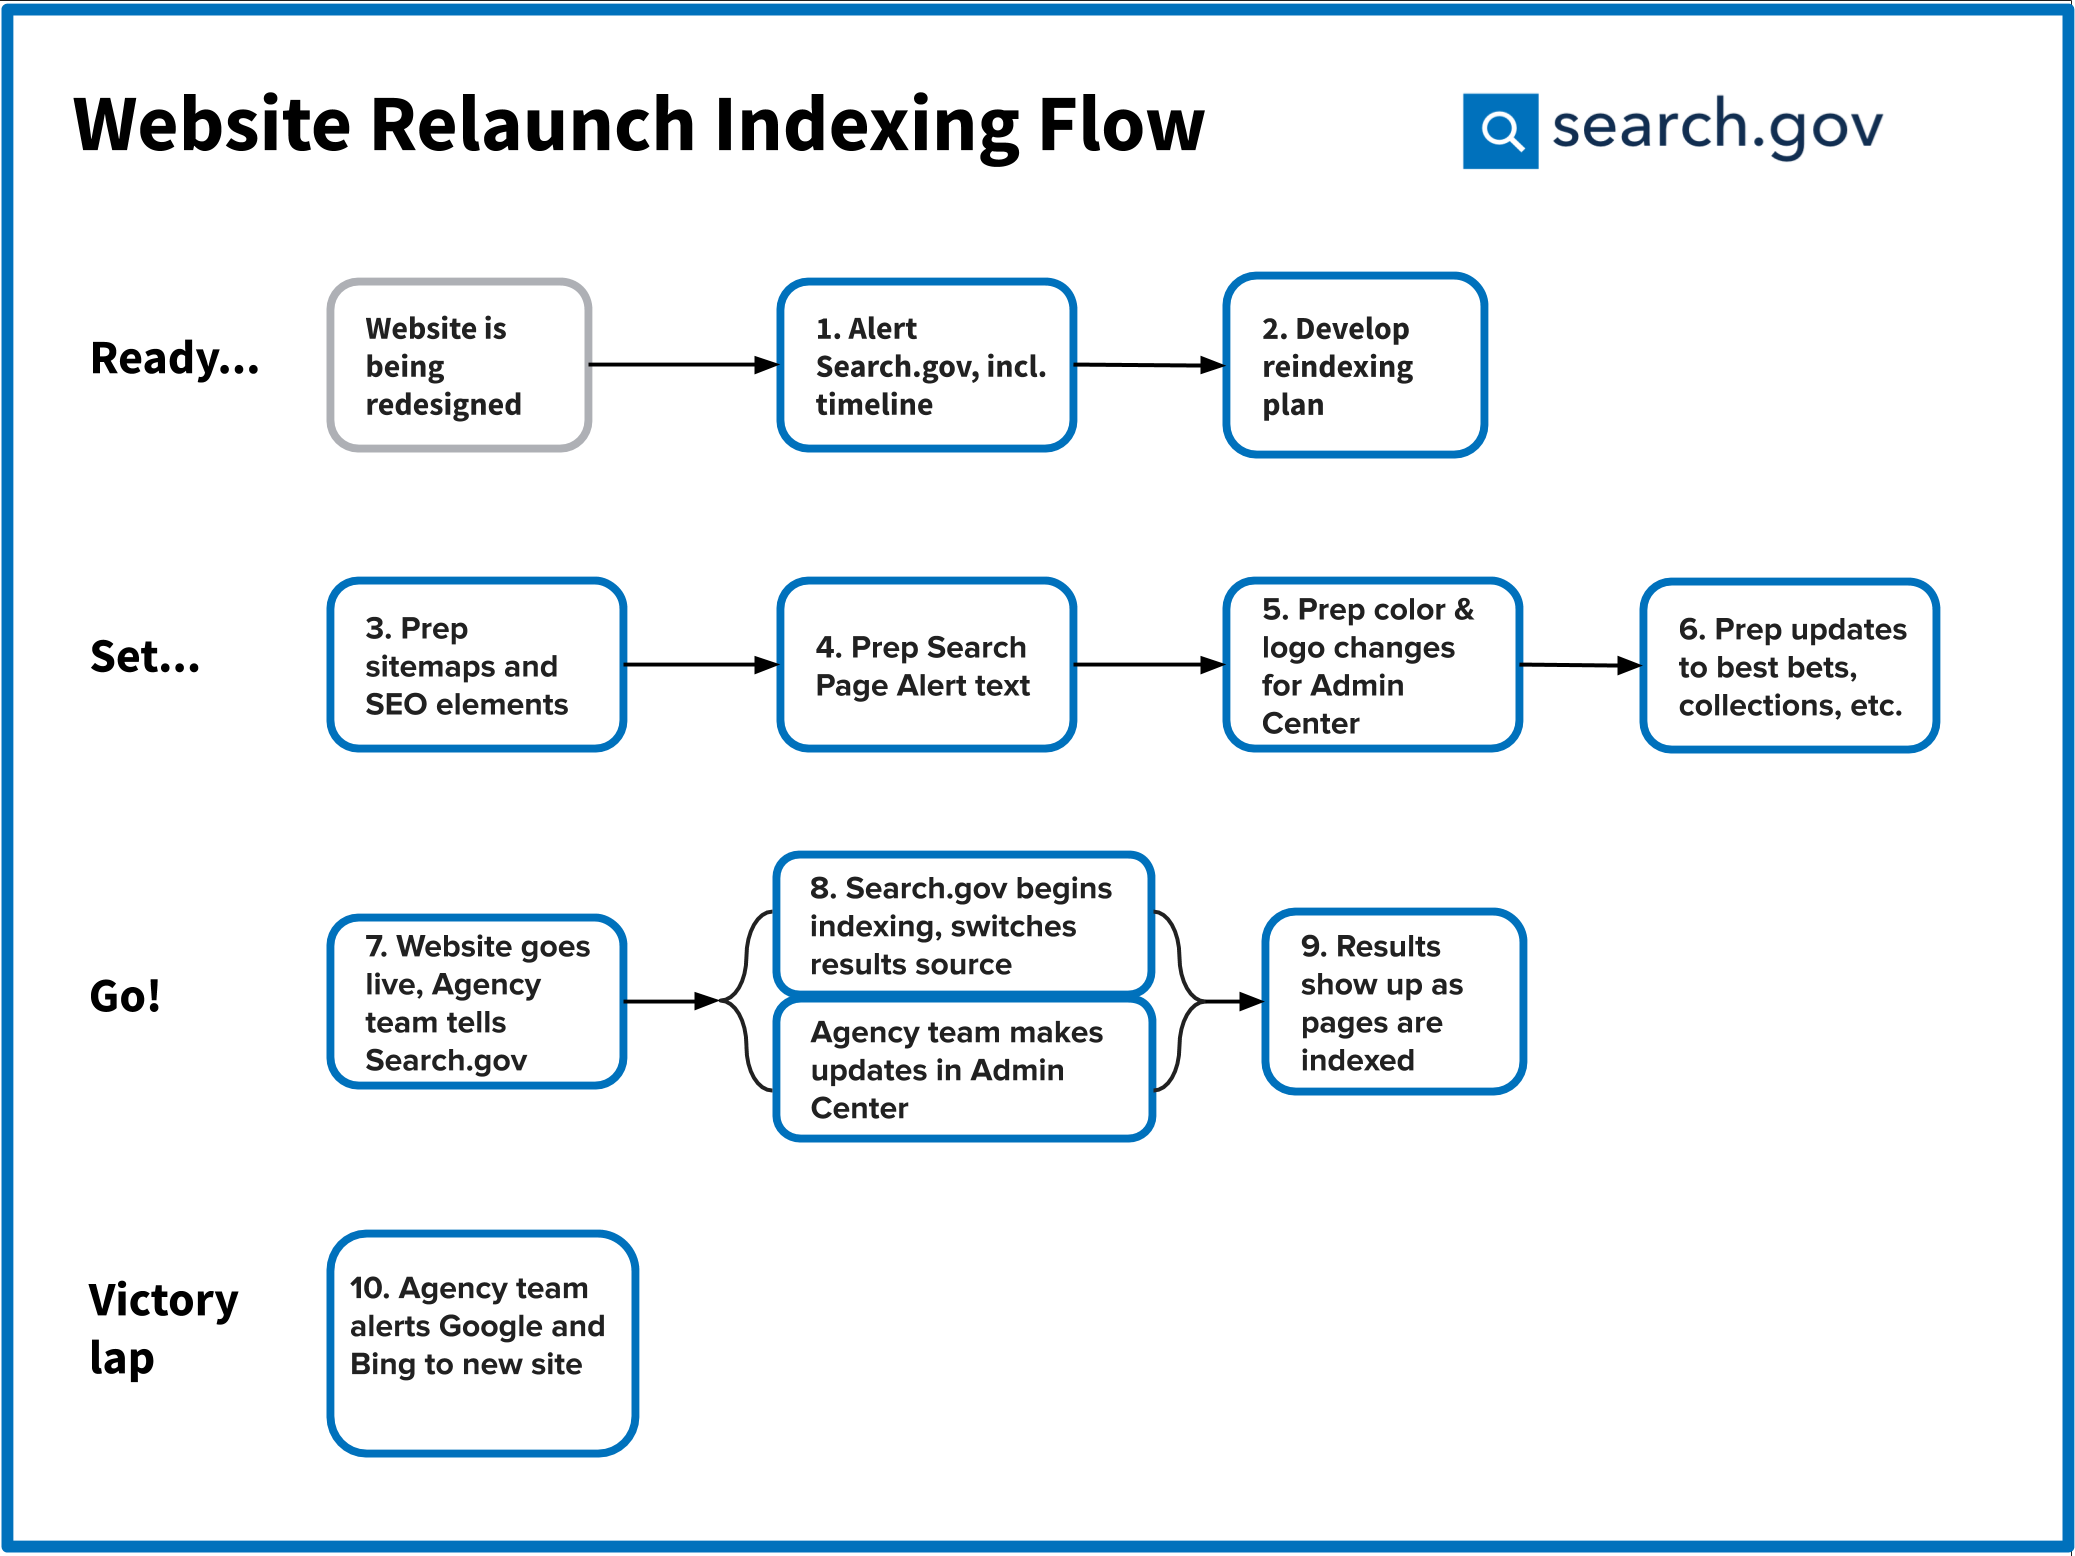 Flow chart showing the steps involved in getting the search index ready to go on Search.gov, for a website that’s being relaunched.